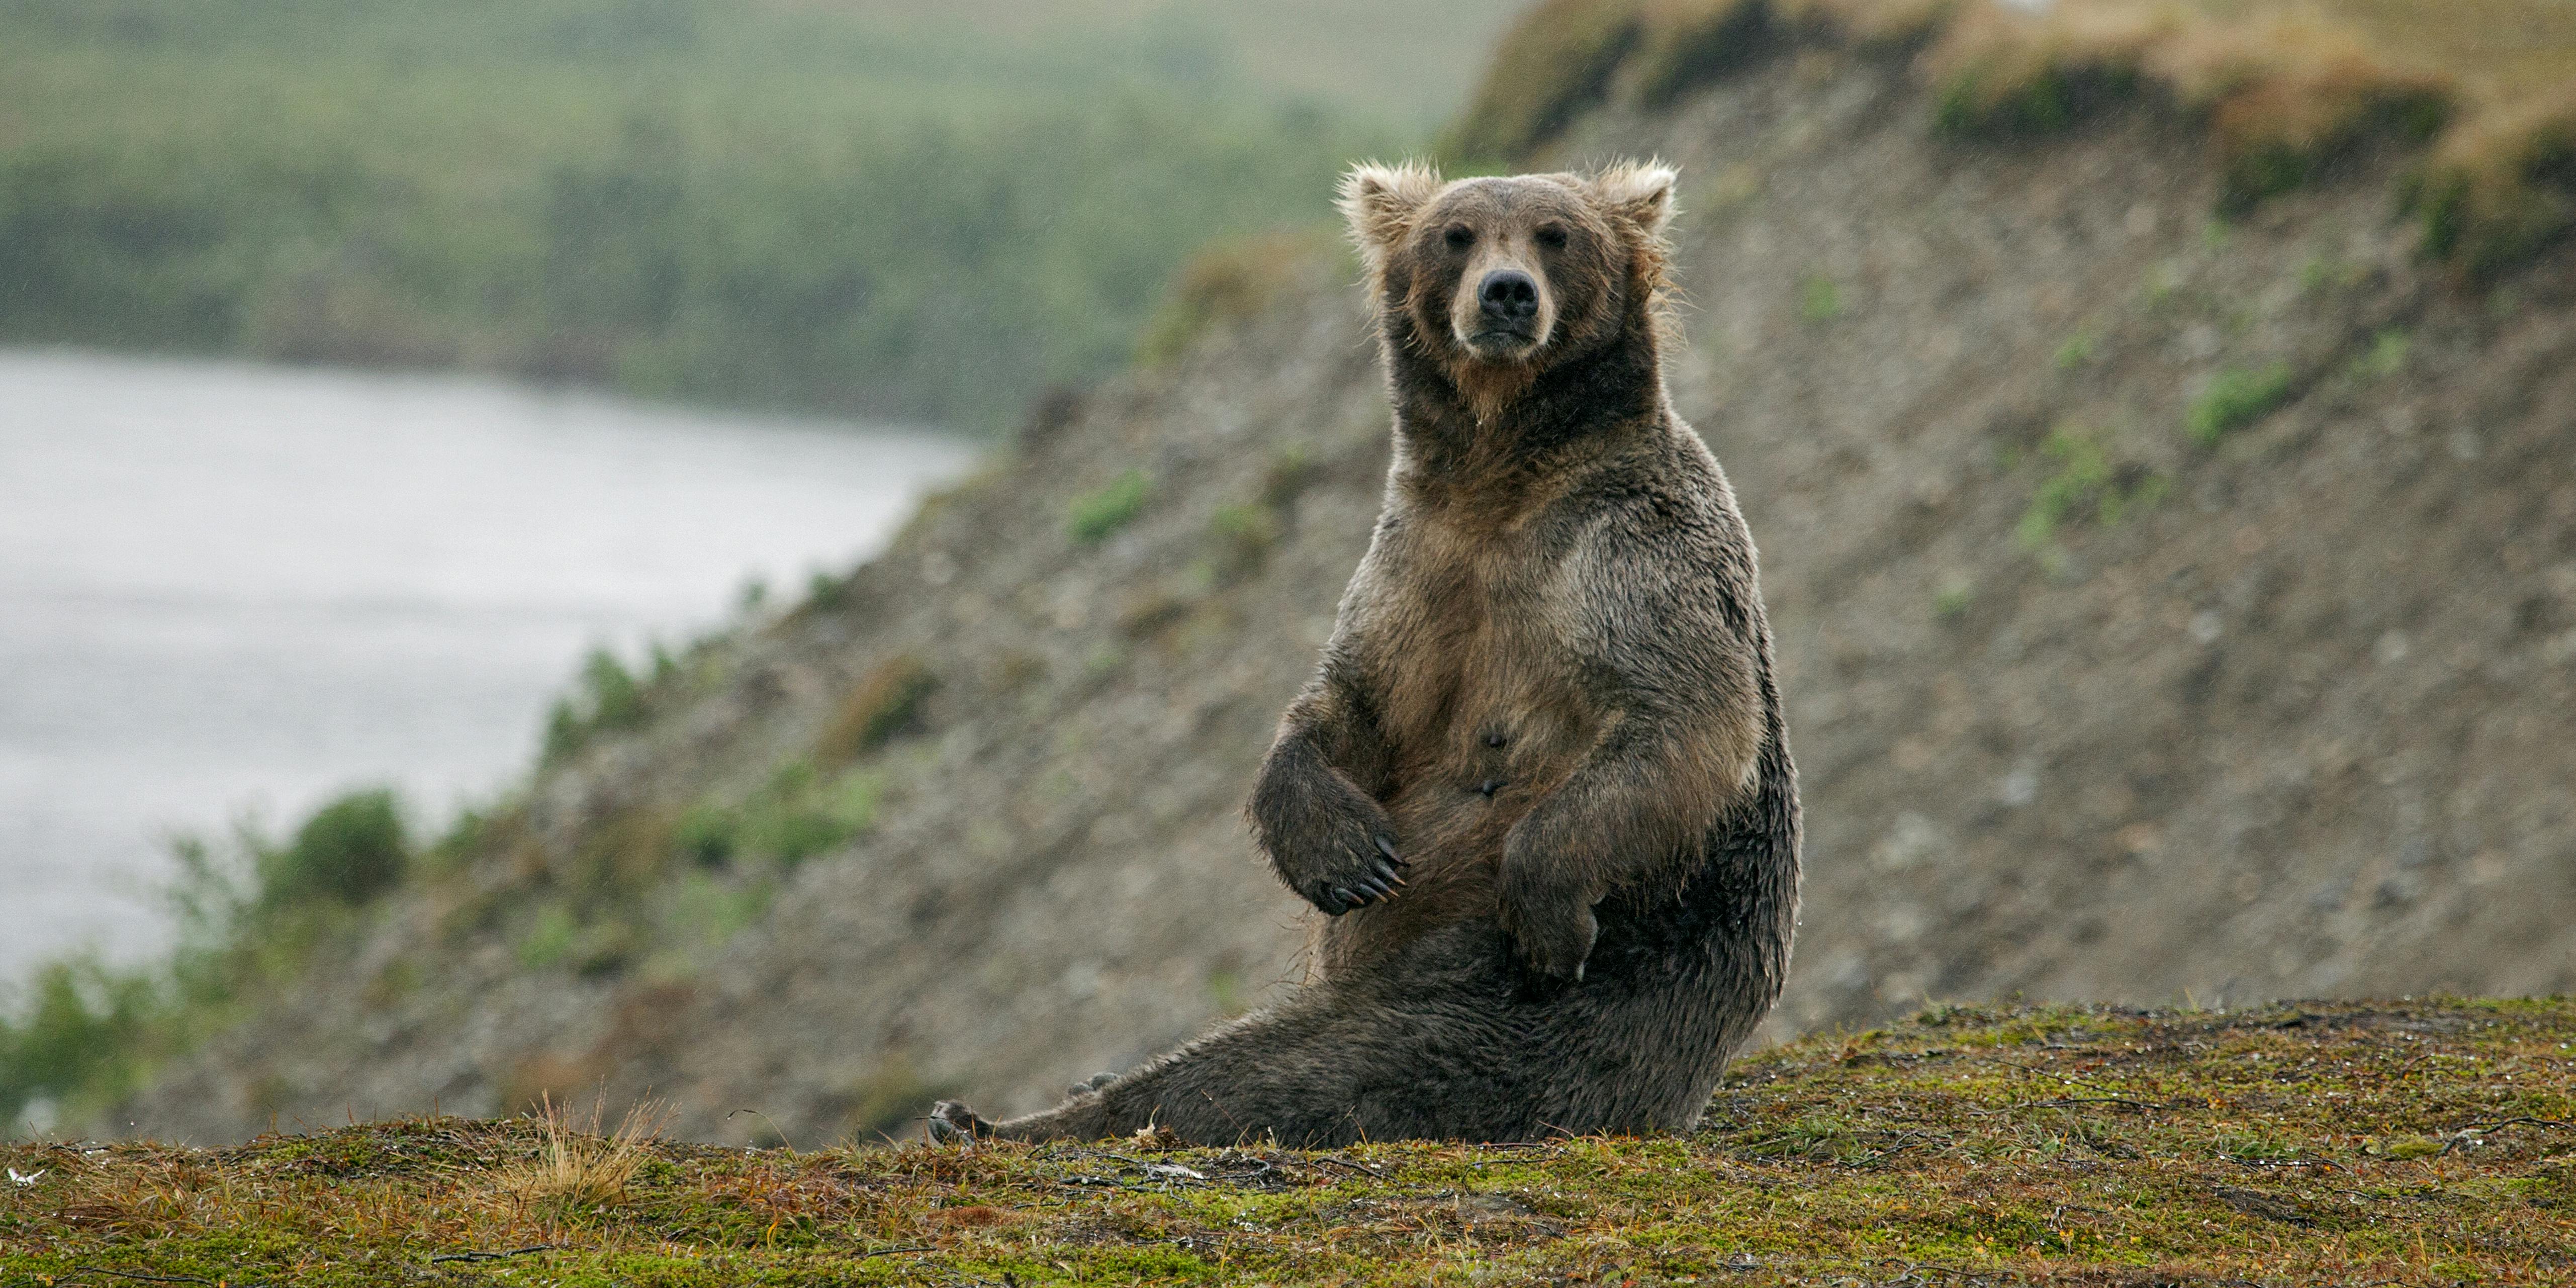 A Wild Alaskan brown bear sitting on upper bank of salmon river. In Canada, bears were discovered guarding a cannabis grow-op in 2010. But instead of eating salmon, they were "paid" in dog food.